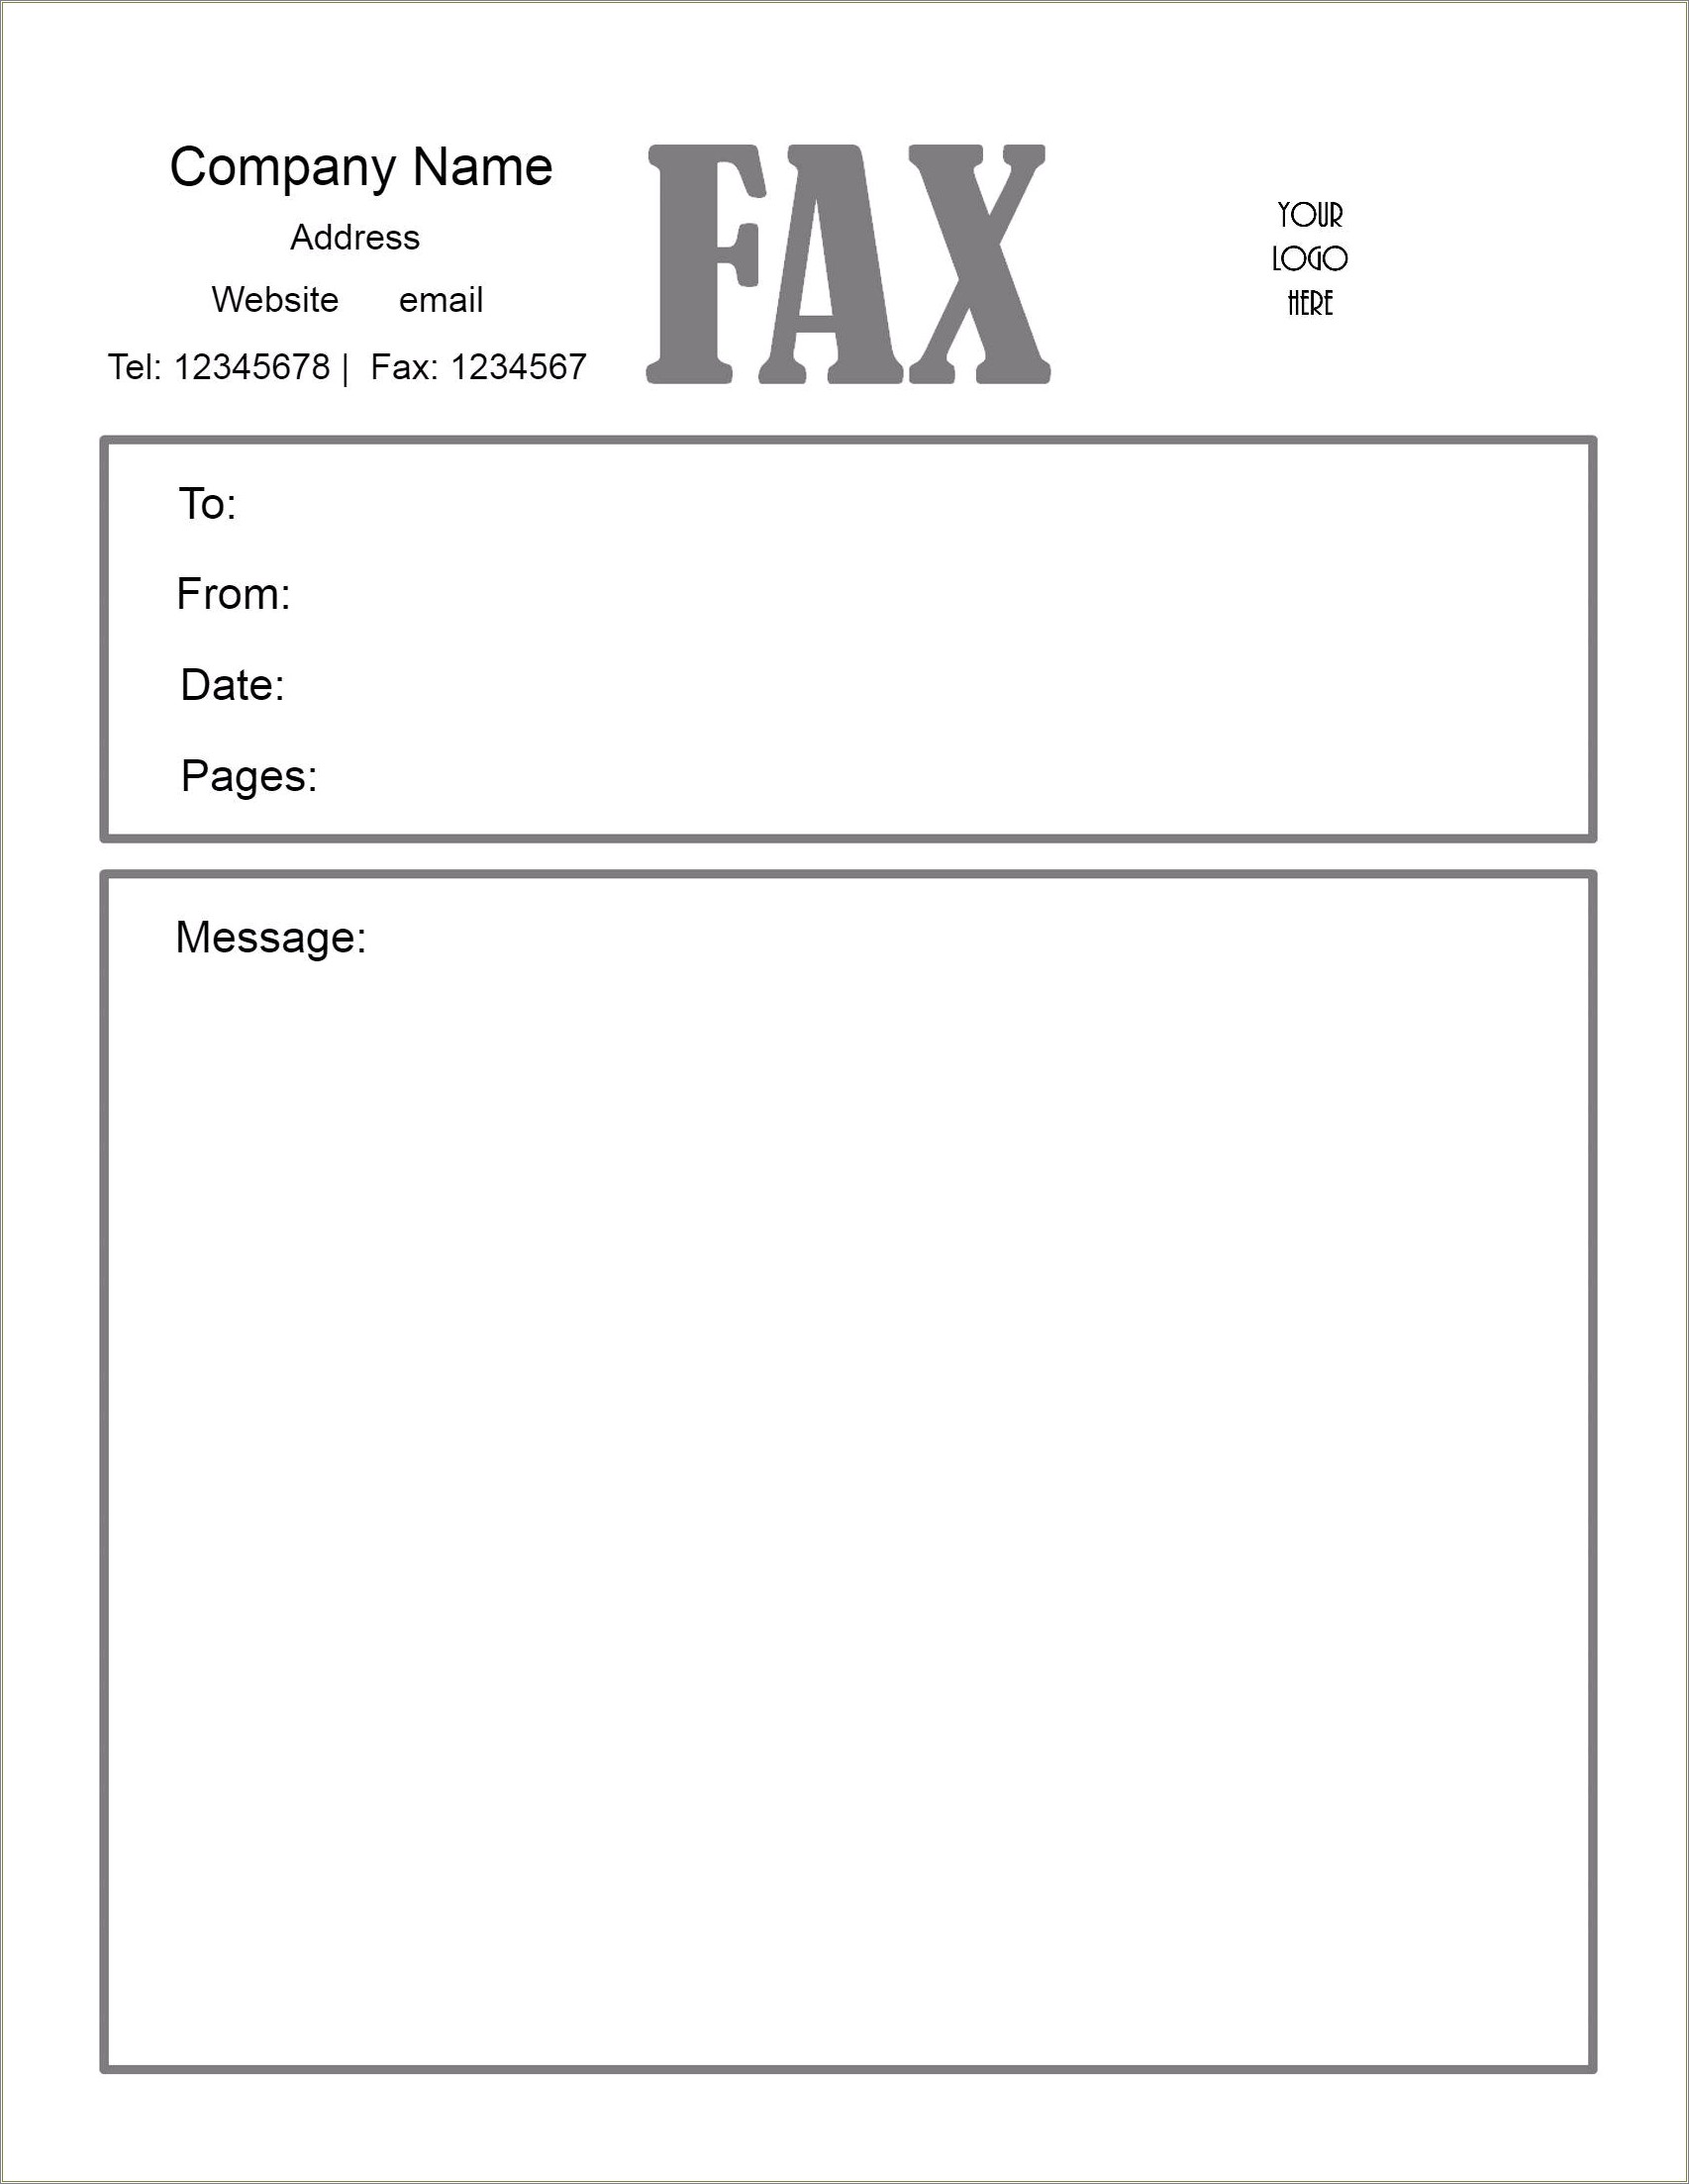 Free Fax Cover Sheet Template To Print